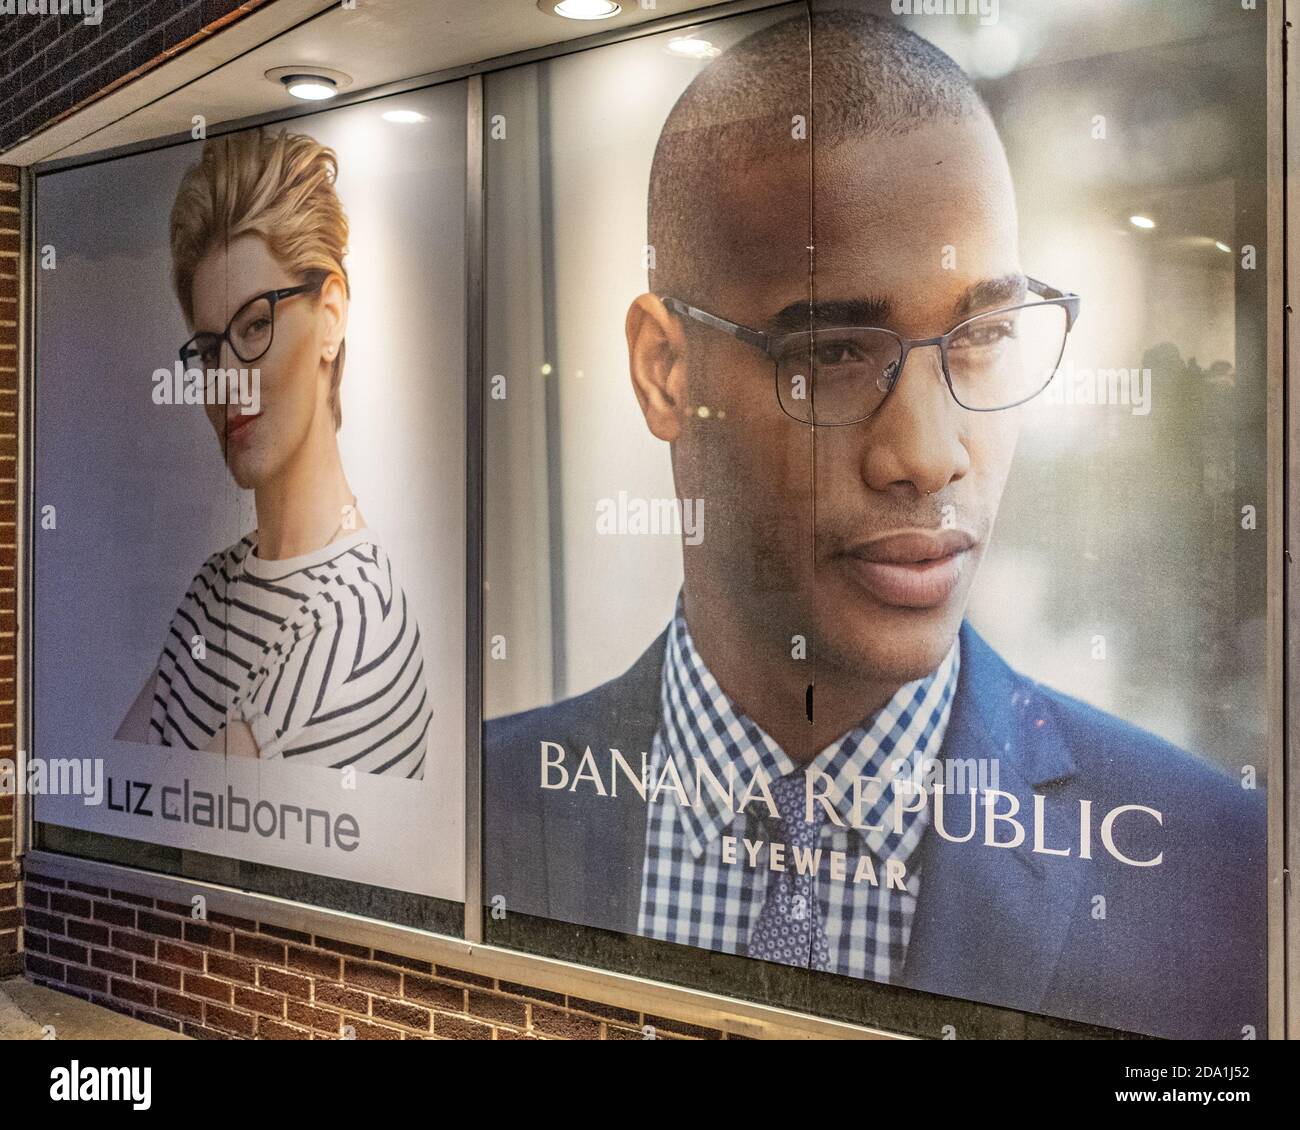 Two faces in a store front window Stock Photo